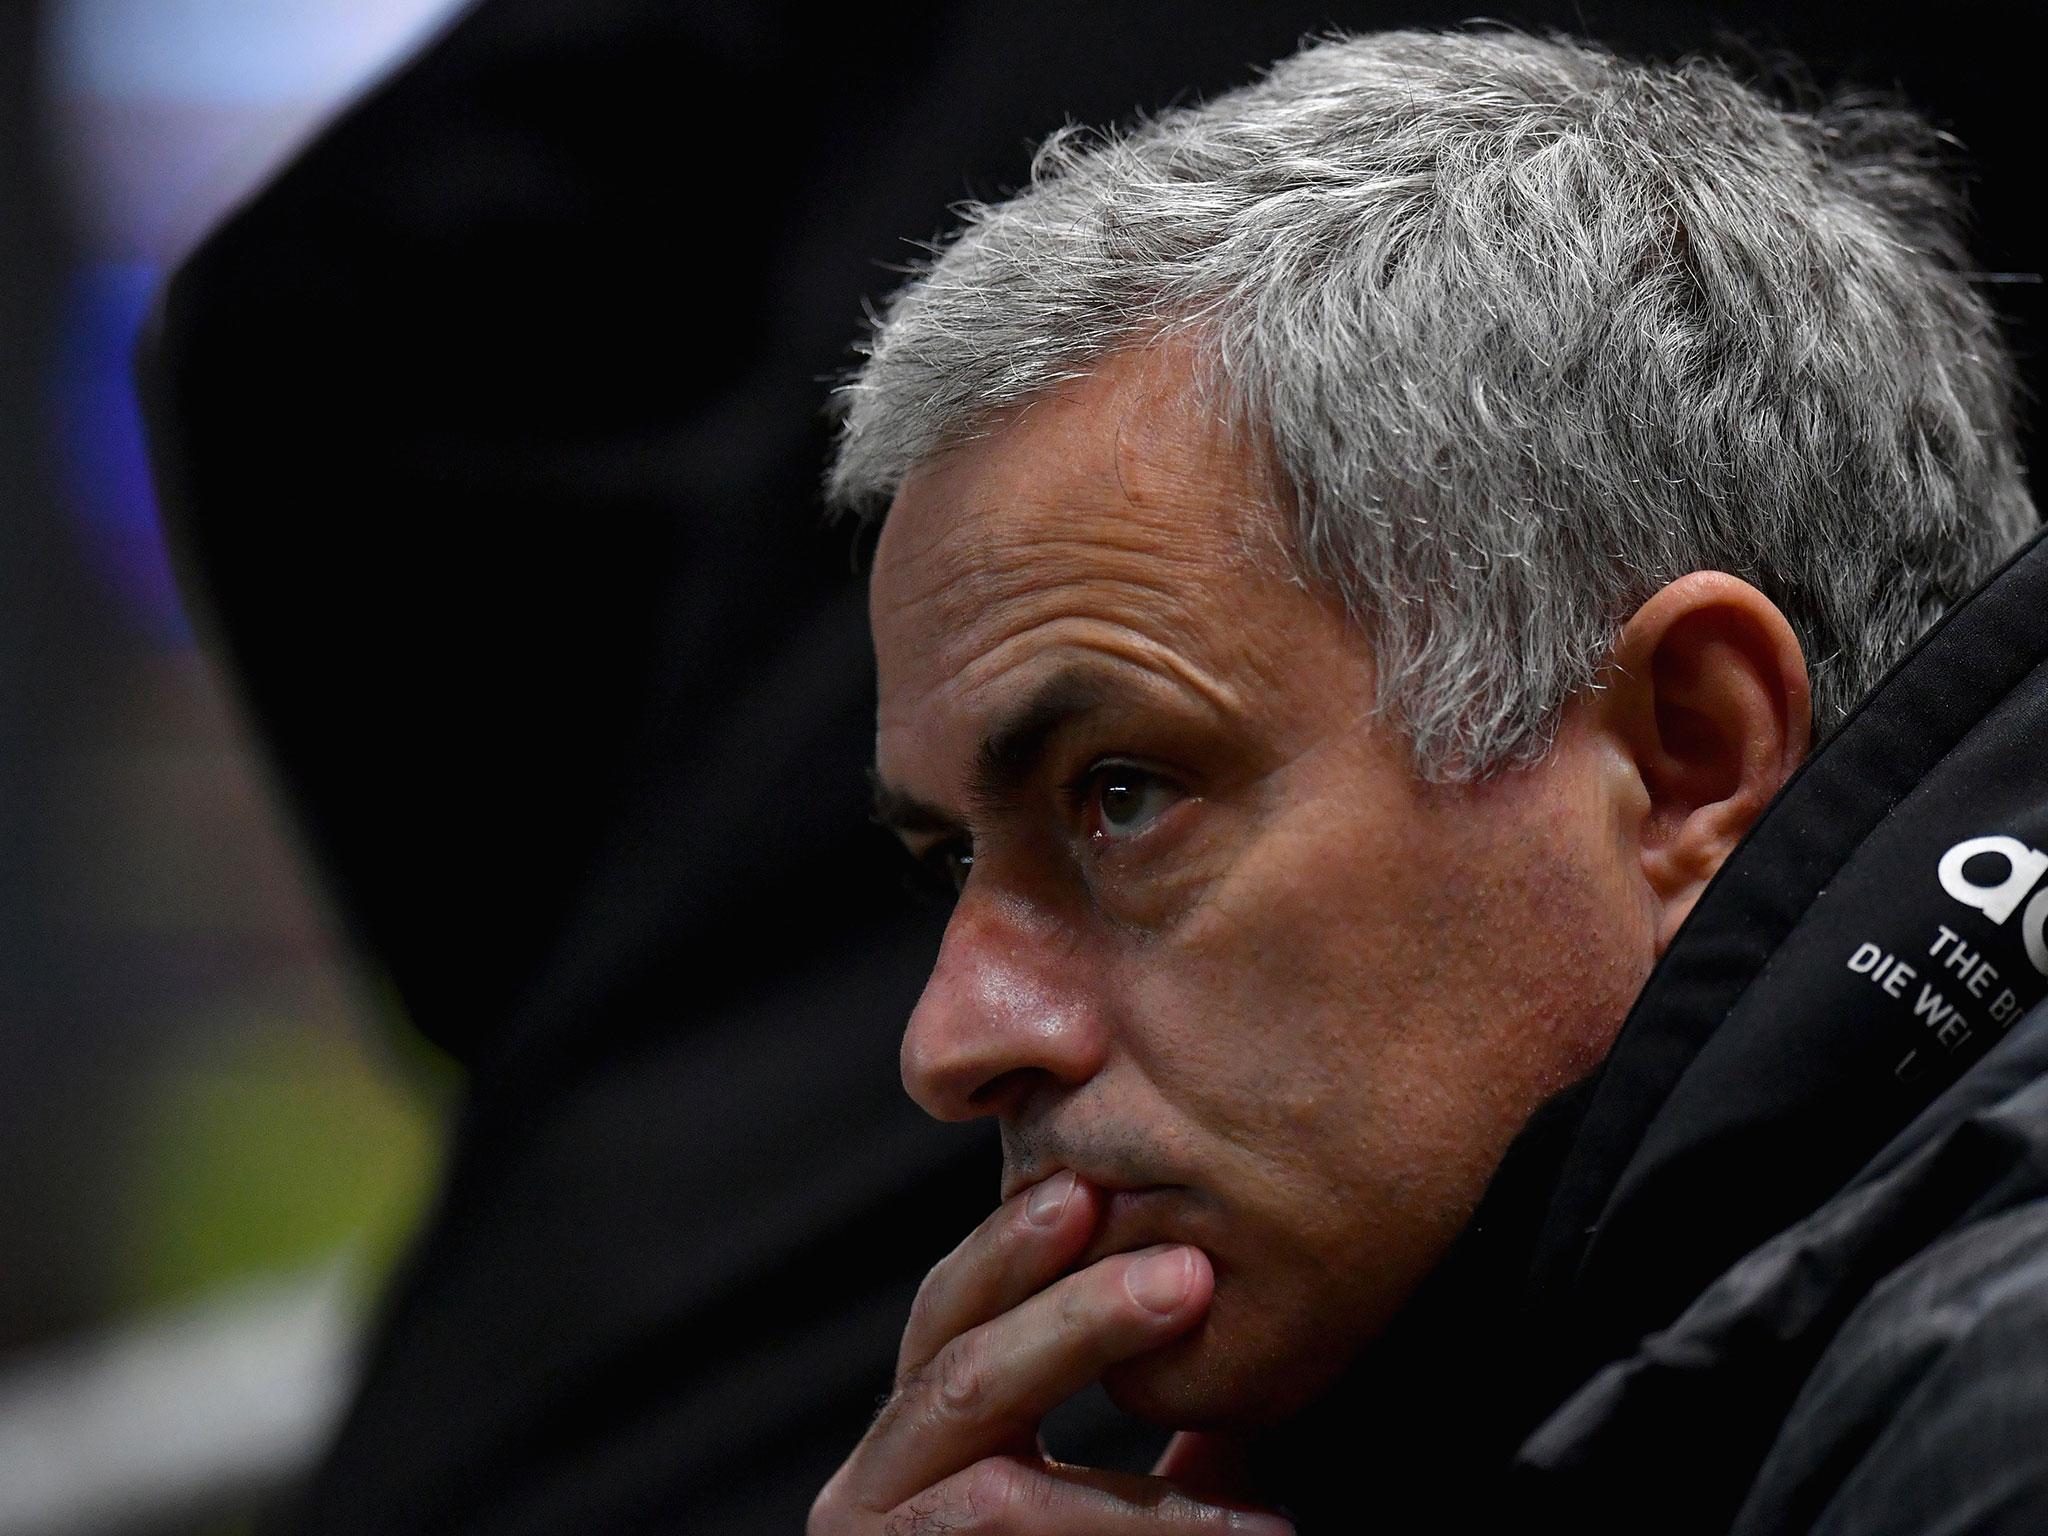 Jose Mourinho's side were subject to a shock 2-1 defeat by the League One side